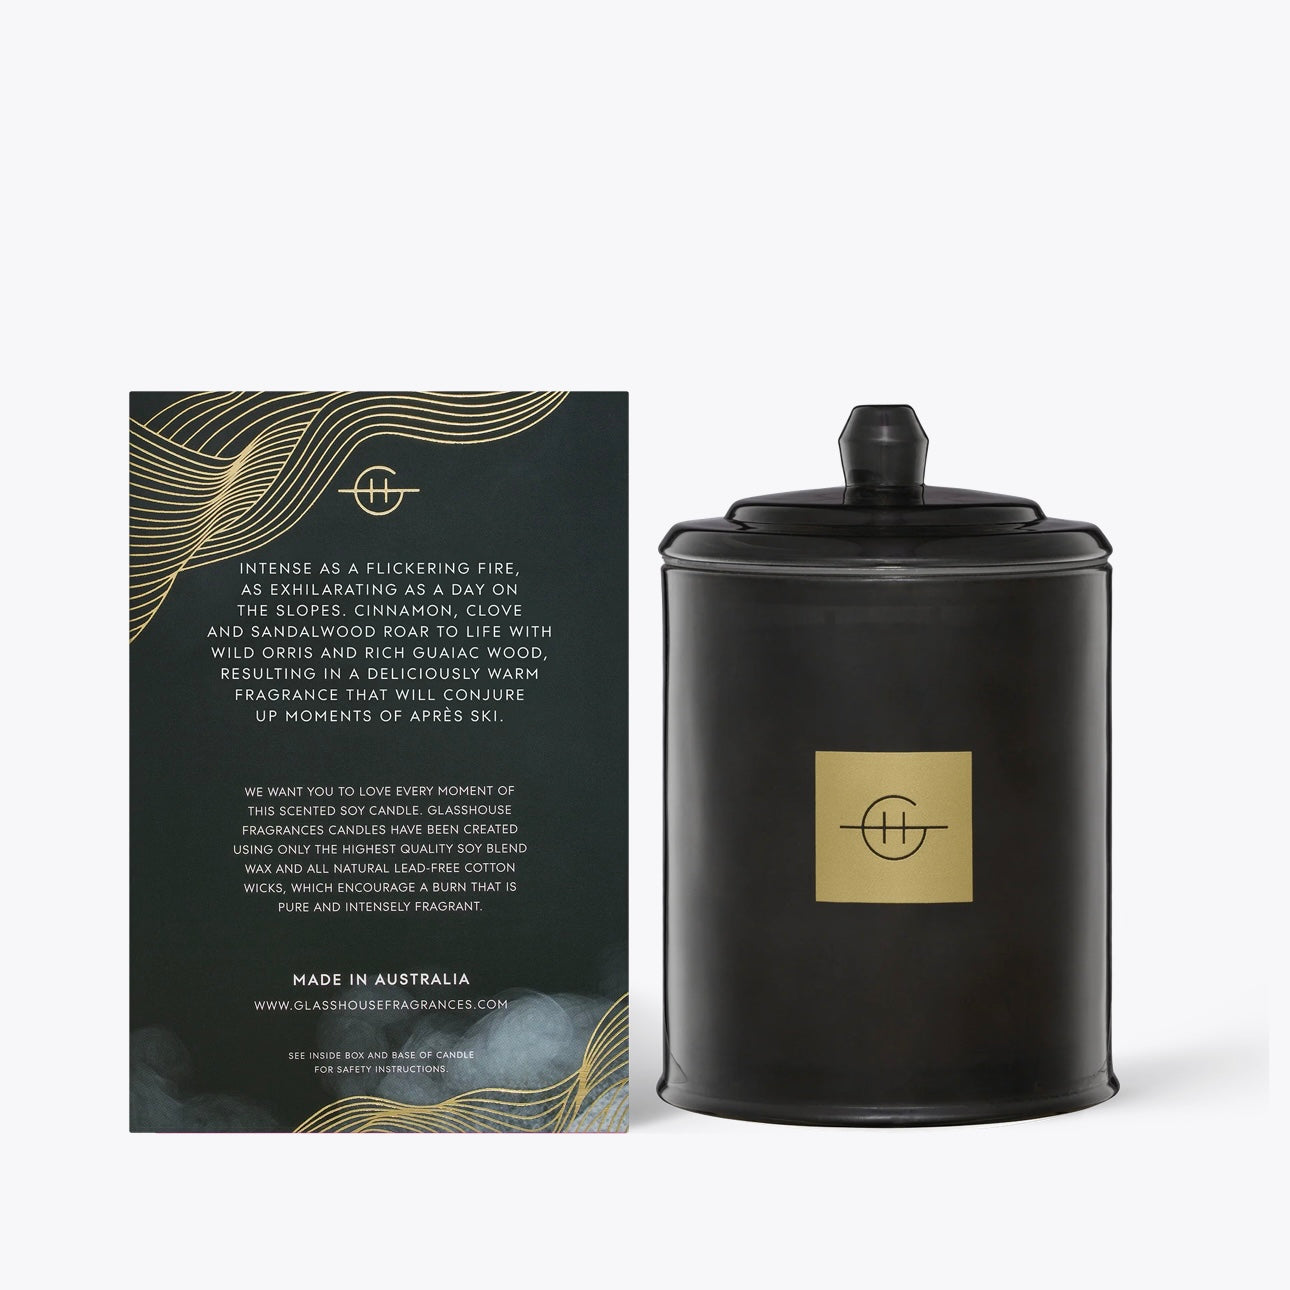 Fireside In Queenstown - 13oz Candle Candle Glasshouse Fragrances   